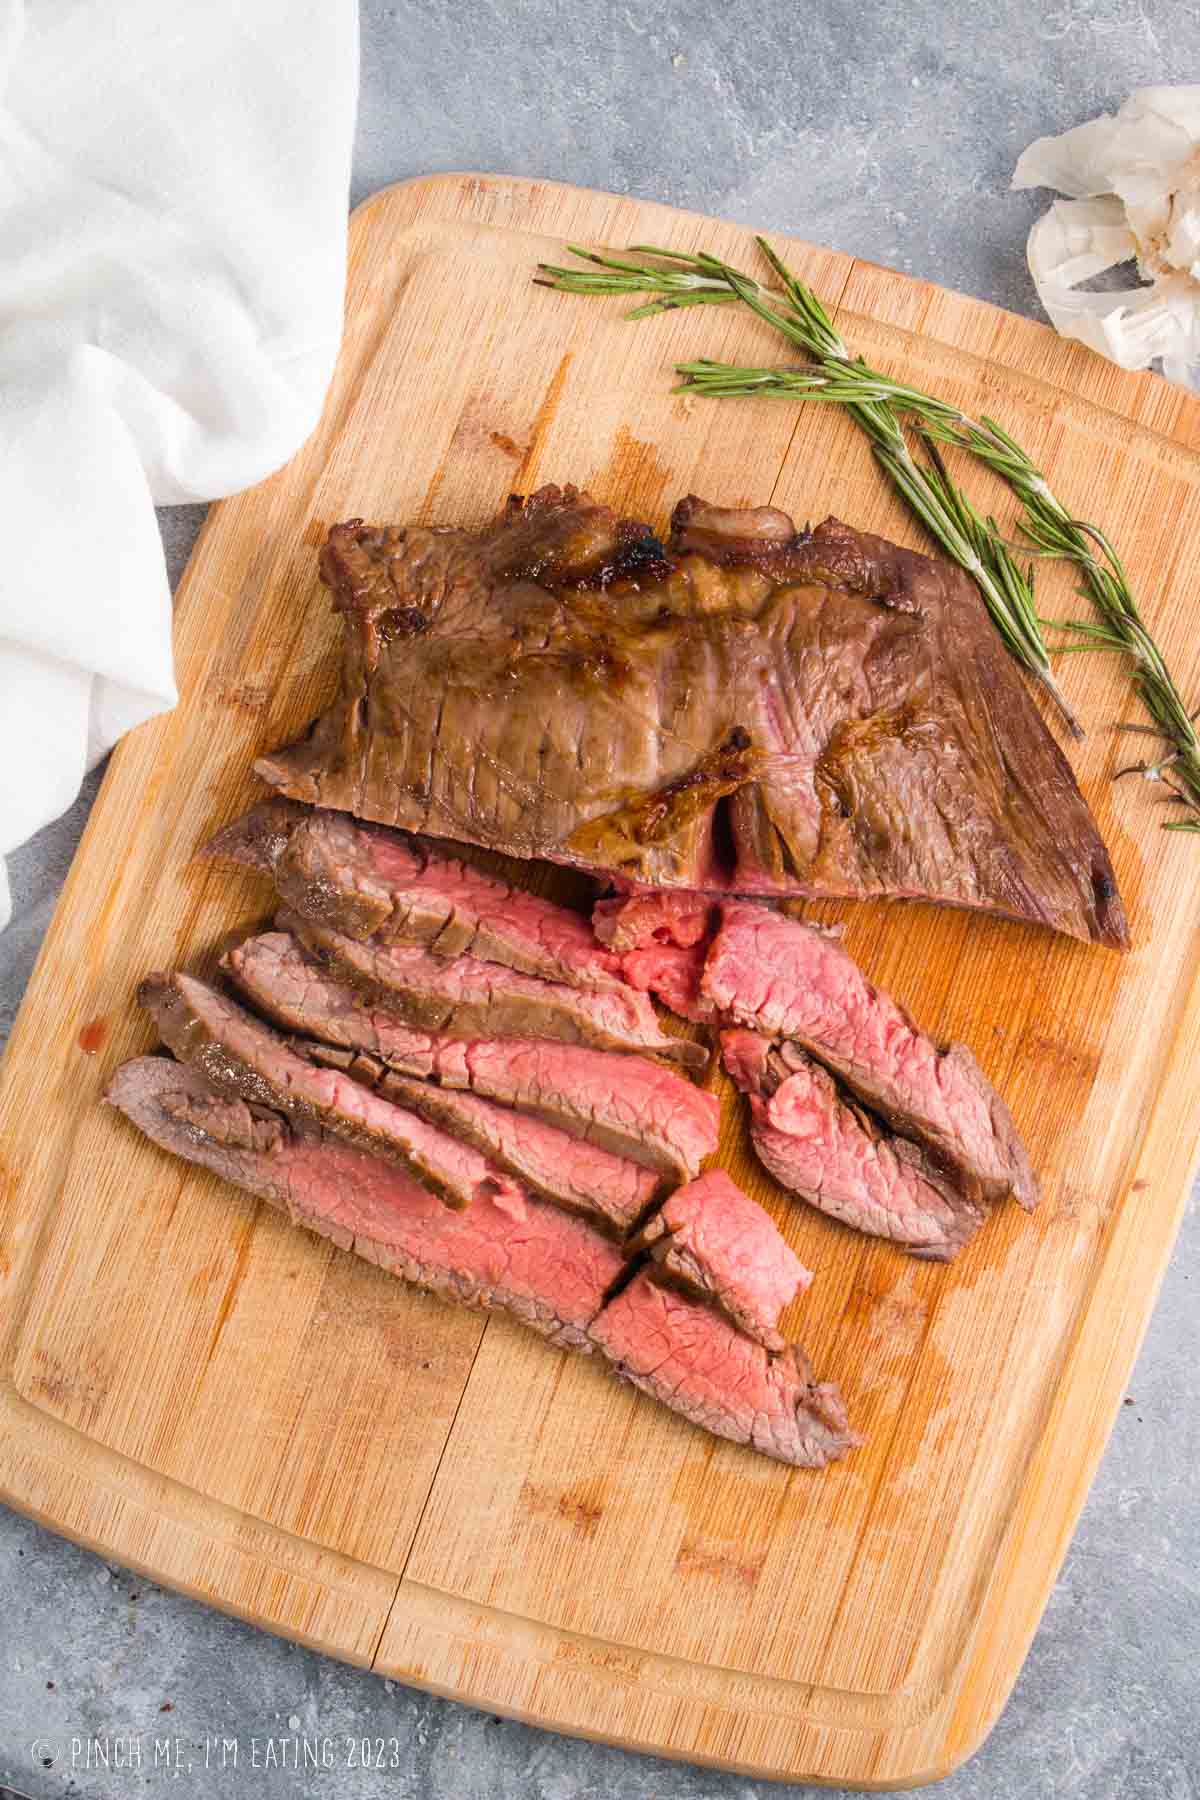 Medium rare flank steak marinated in red wine steak marinade sliced on a wooden cutting board with rosemary.